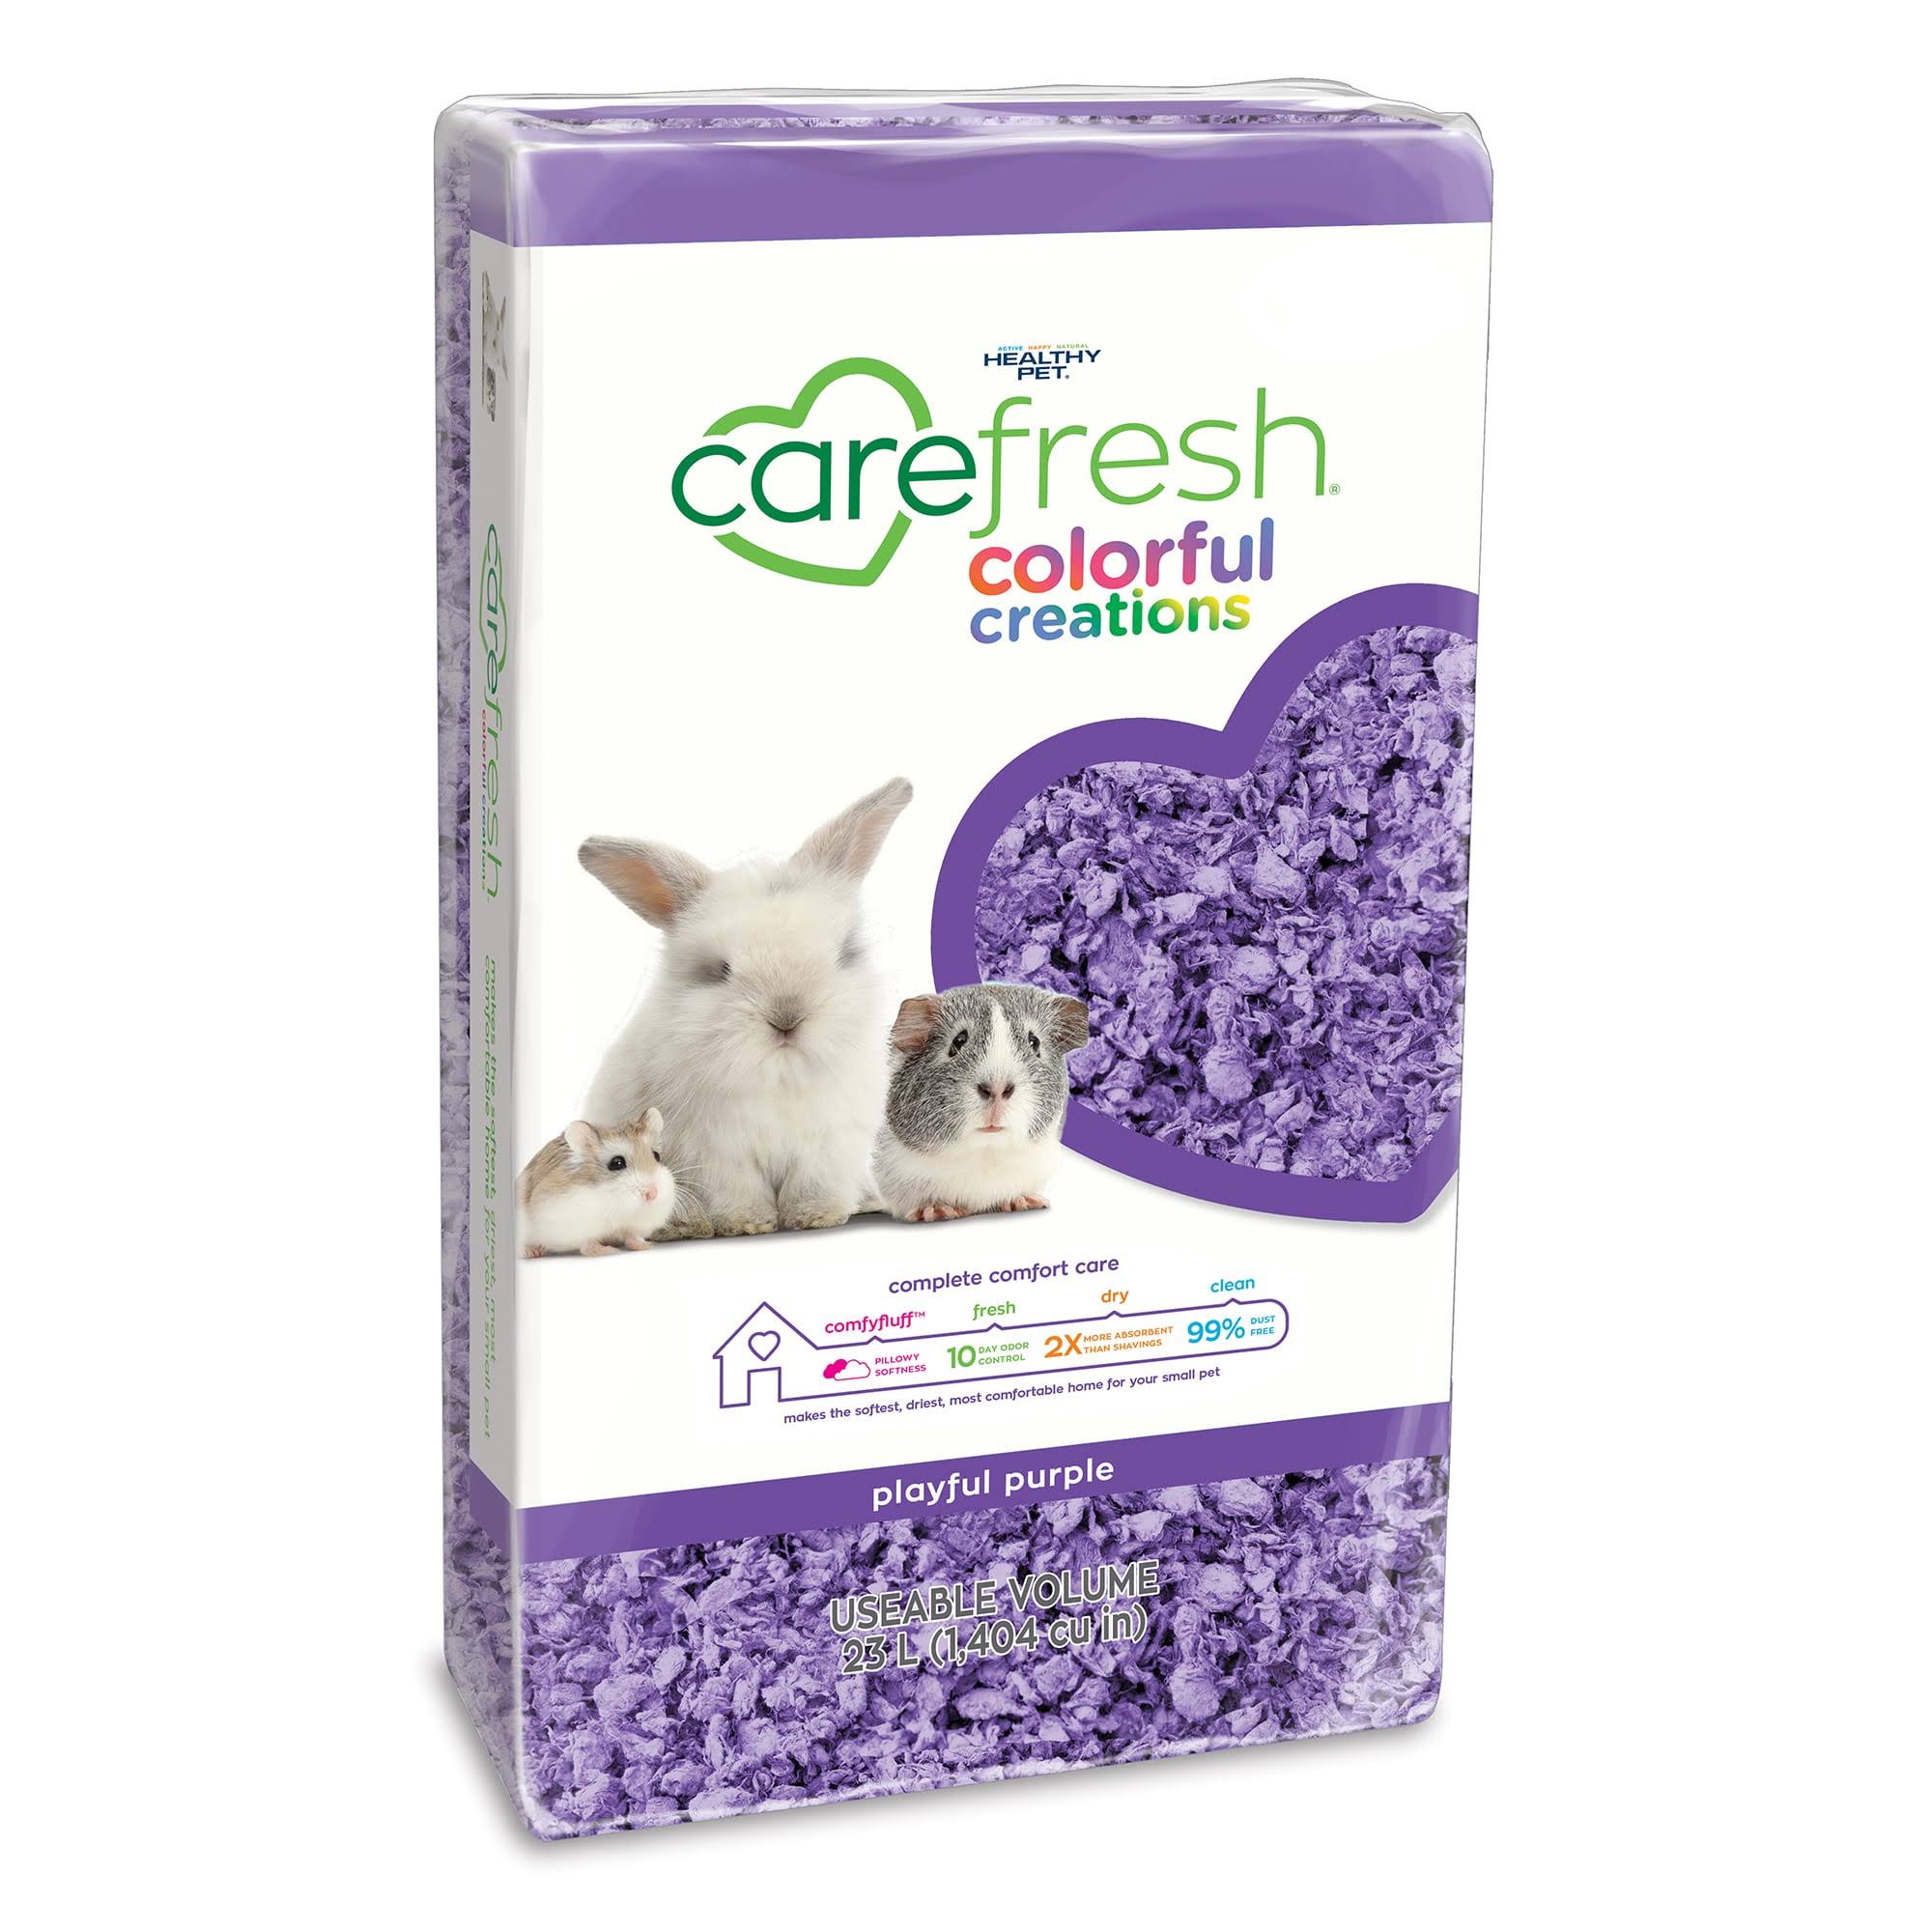 Carefresh Colorful Creations Small Pet Bedding Playful Purple 23 L